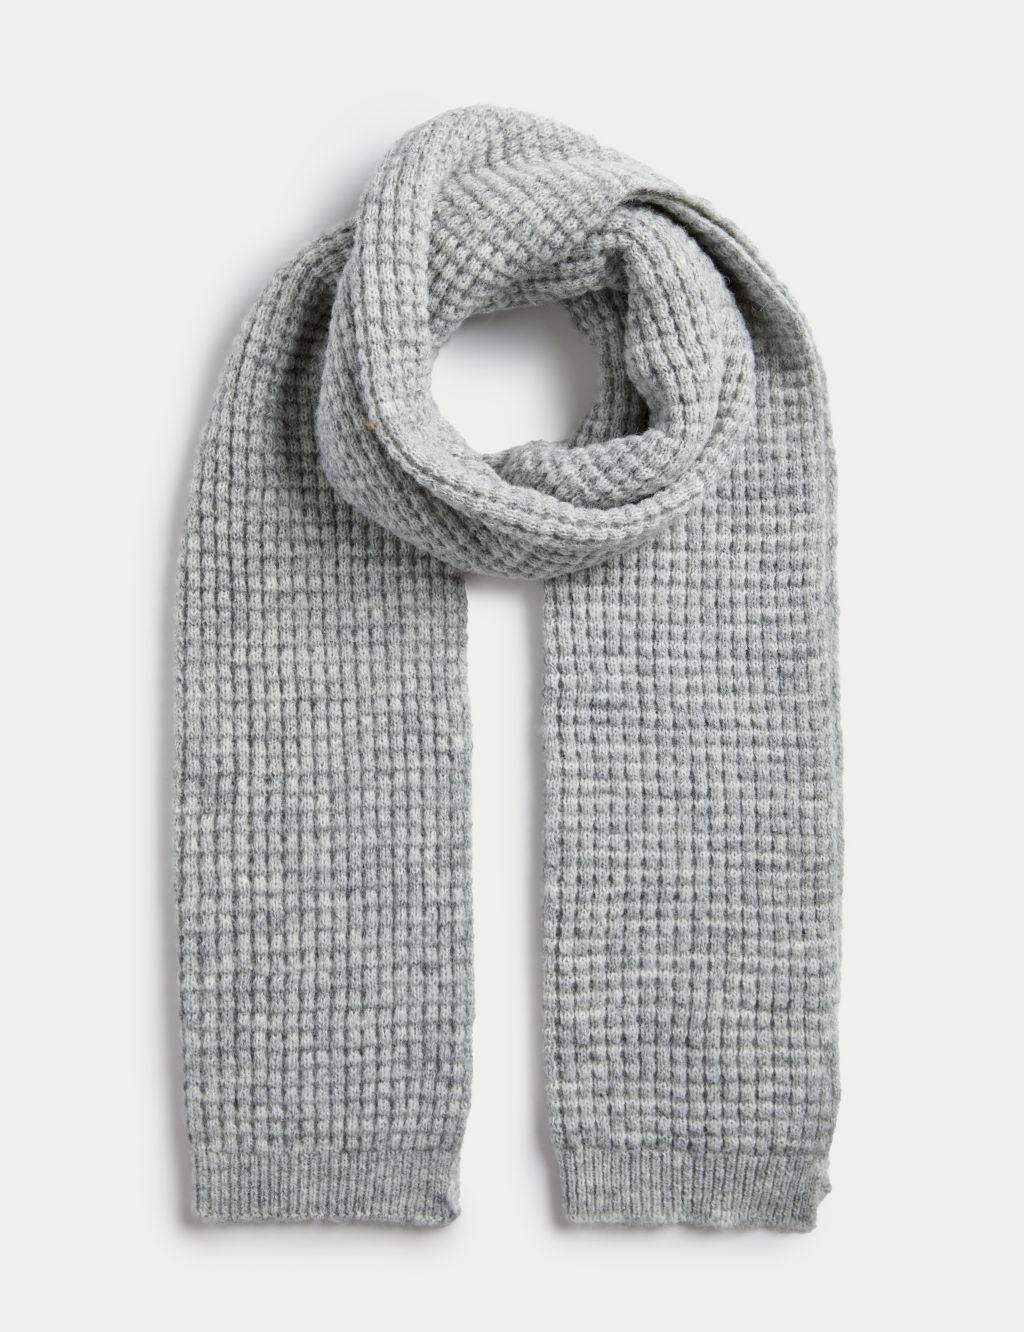 Textured Scarf with Wool image 1